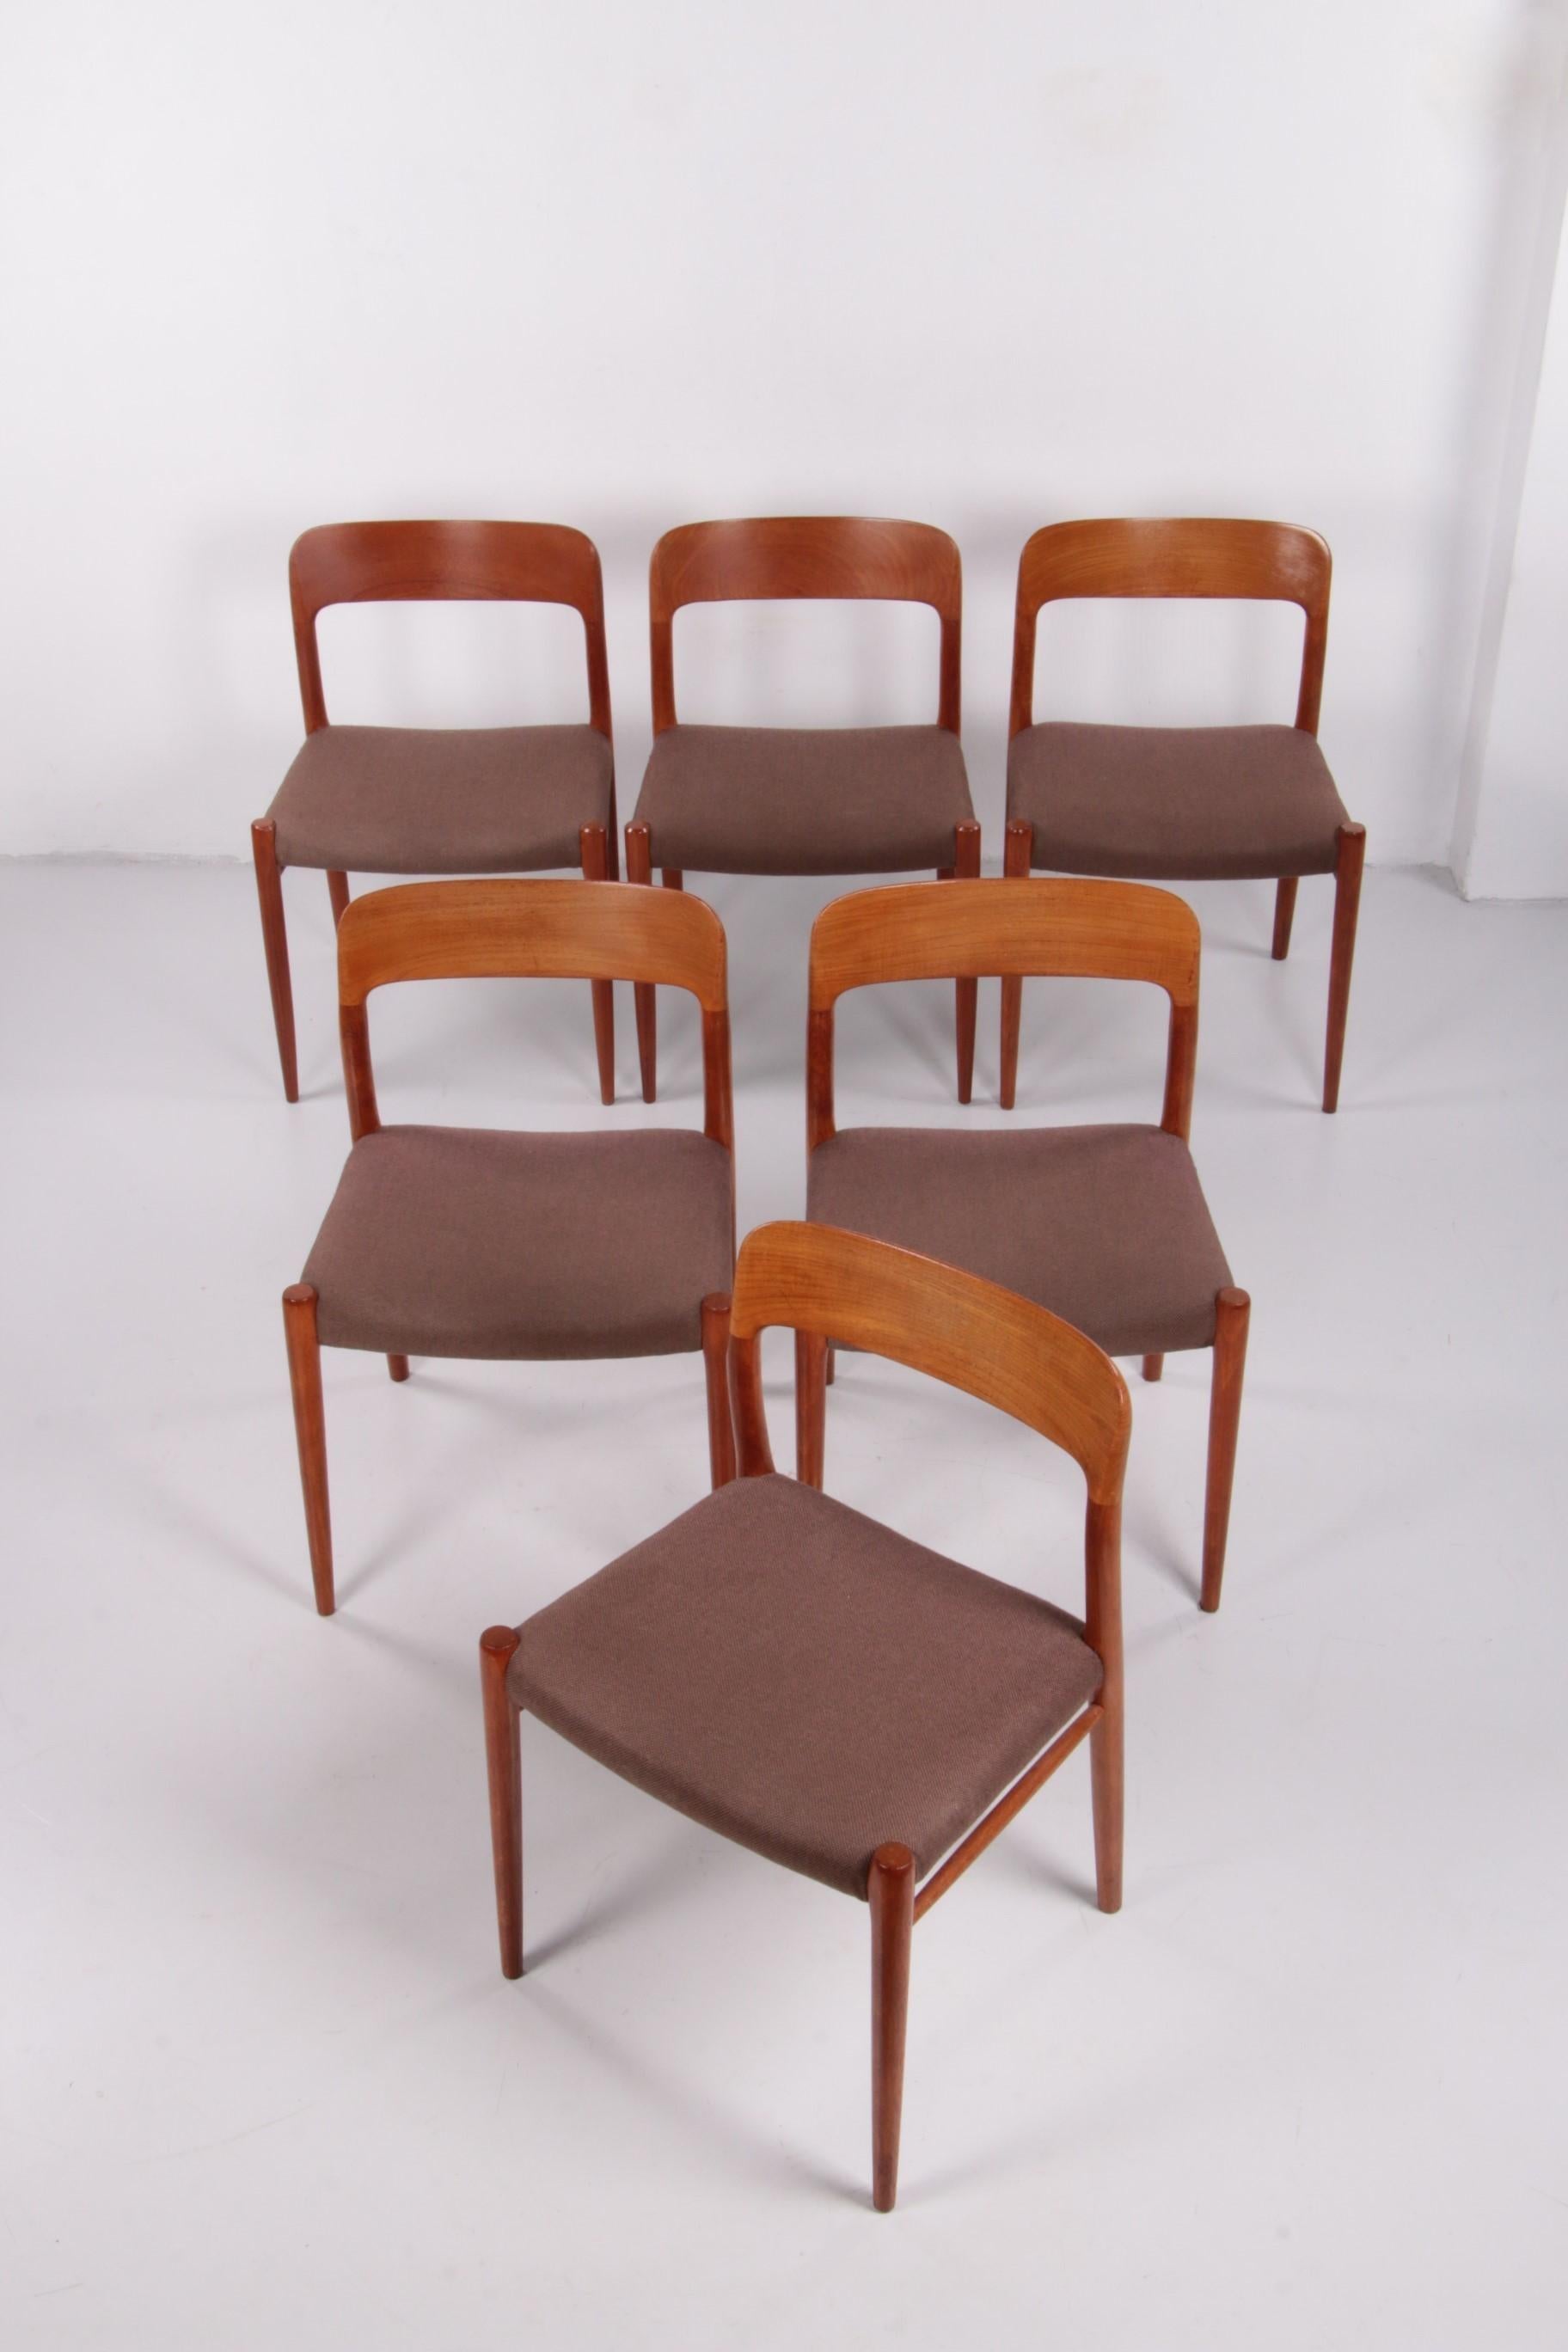 Set of 6 Niels Moller dining room chairs model 75 Denmark 1960


Very nice set of 6 dining room chairs designed by Niels Møller.

Niels Møller is known in Denmark for quality and craftsmanship and that is clearly visible in this model, 'model